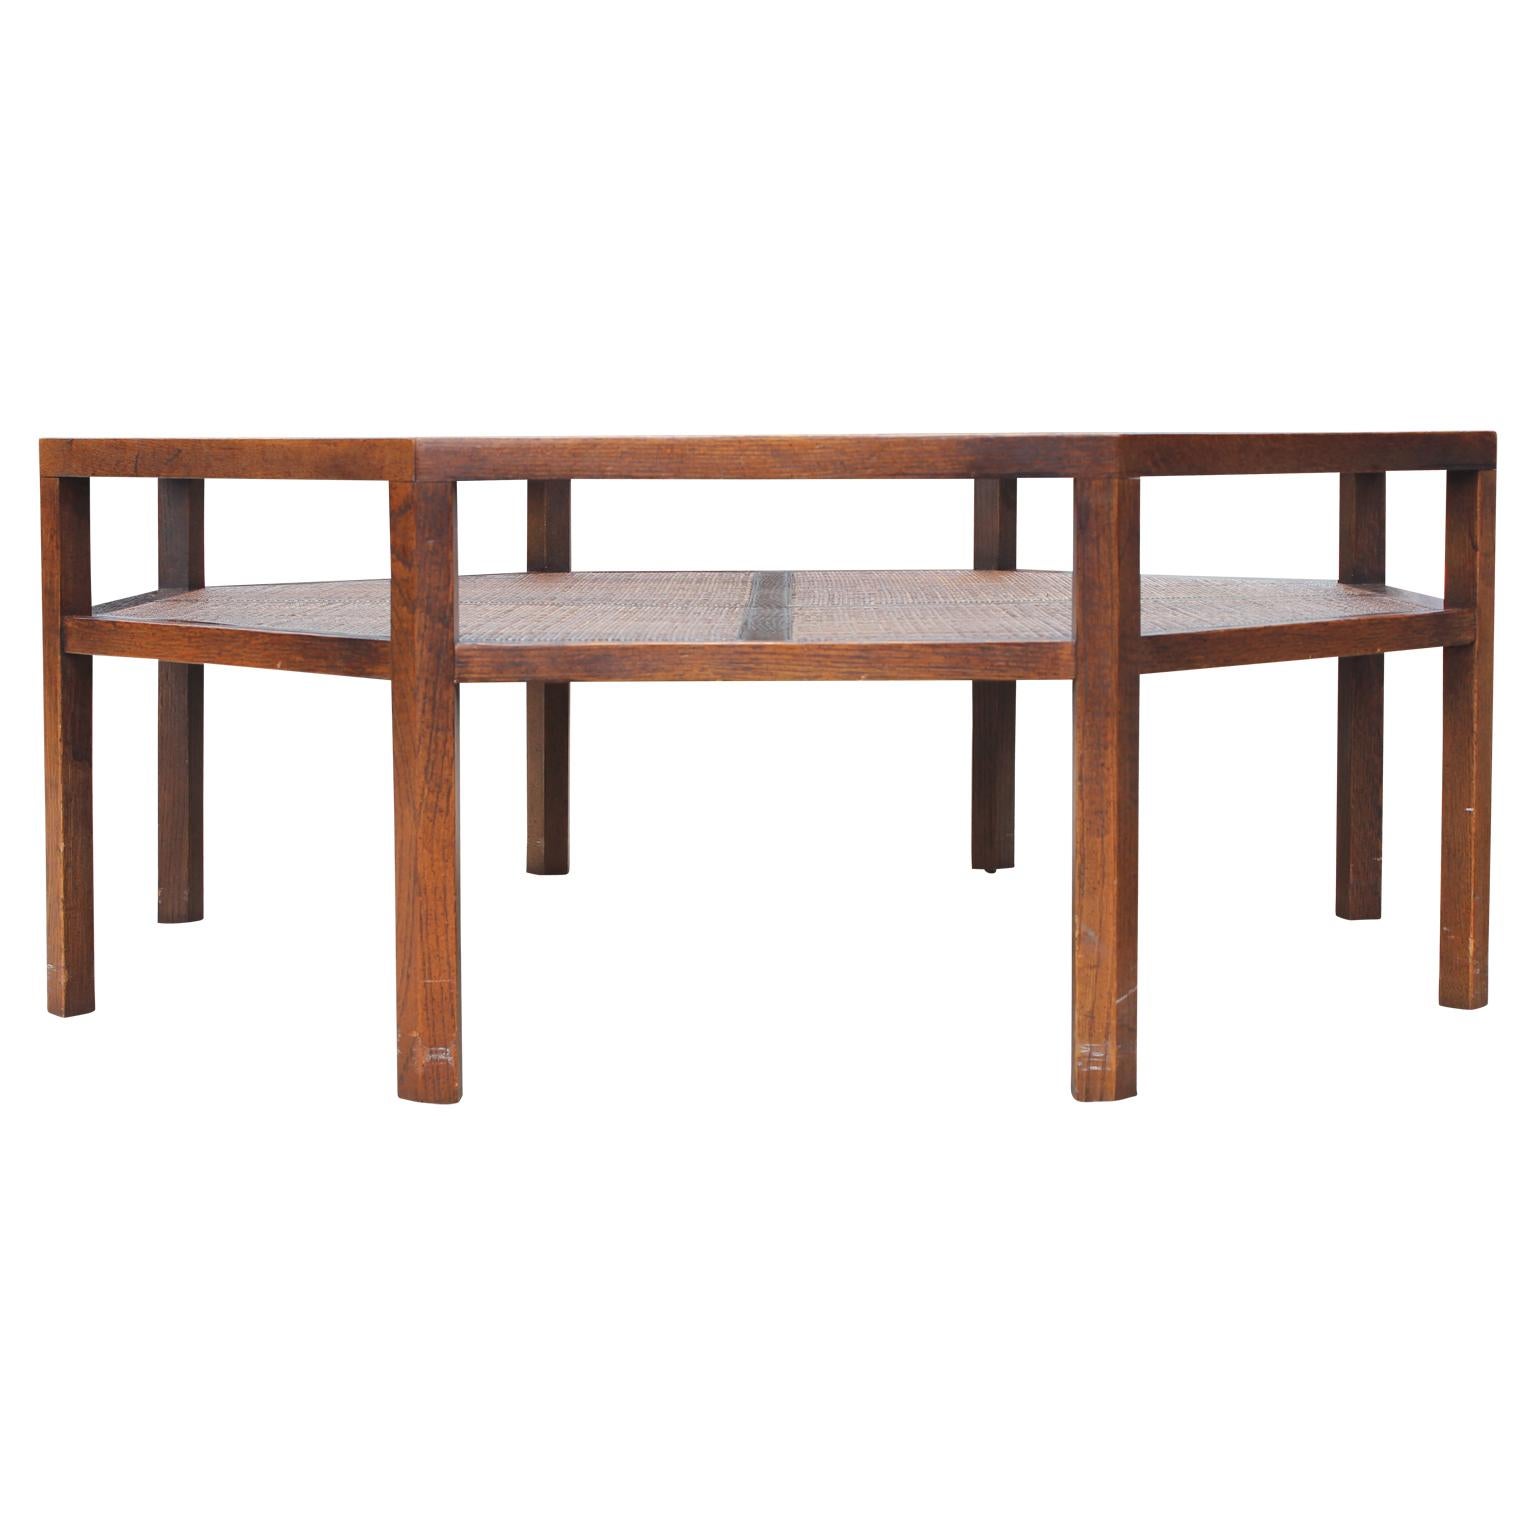 Beautiful octagon shaped walnut coffee table with a glass top. Perfect piece to tie together a sitting room.